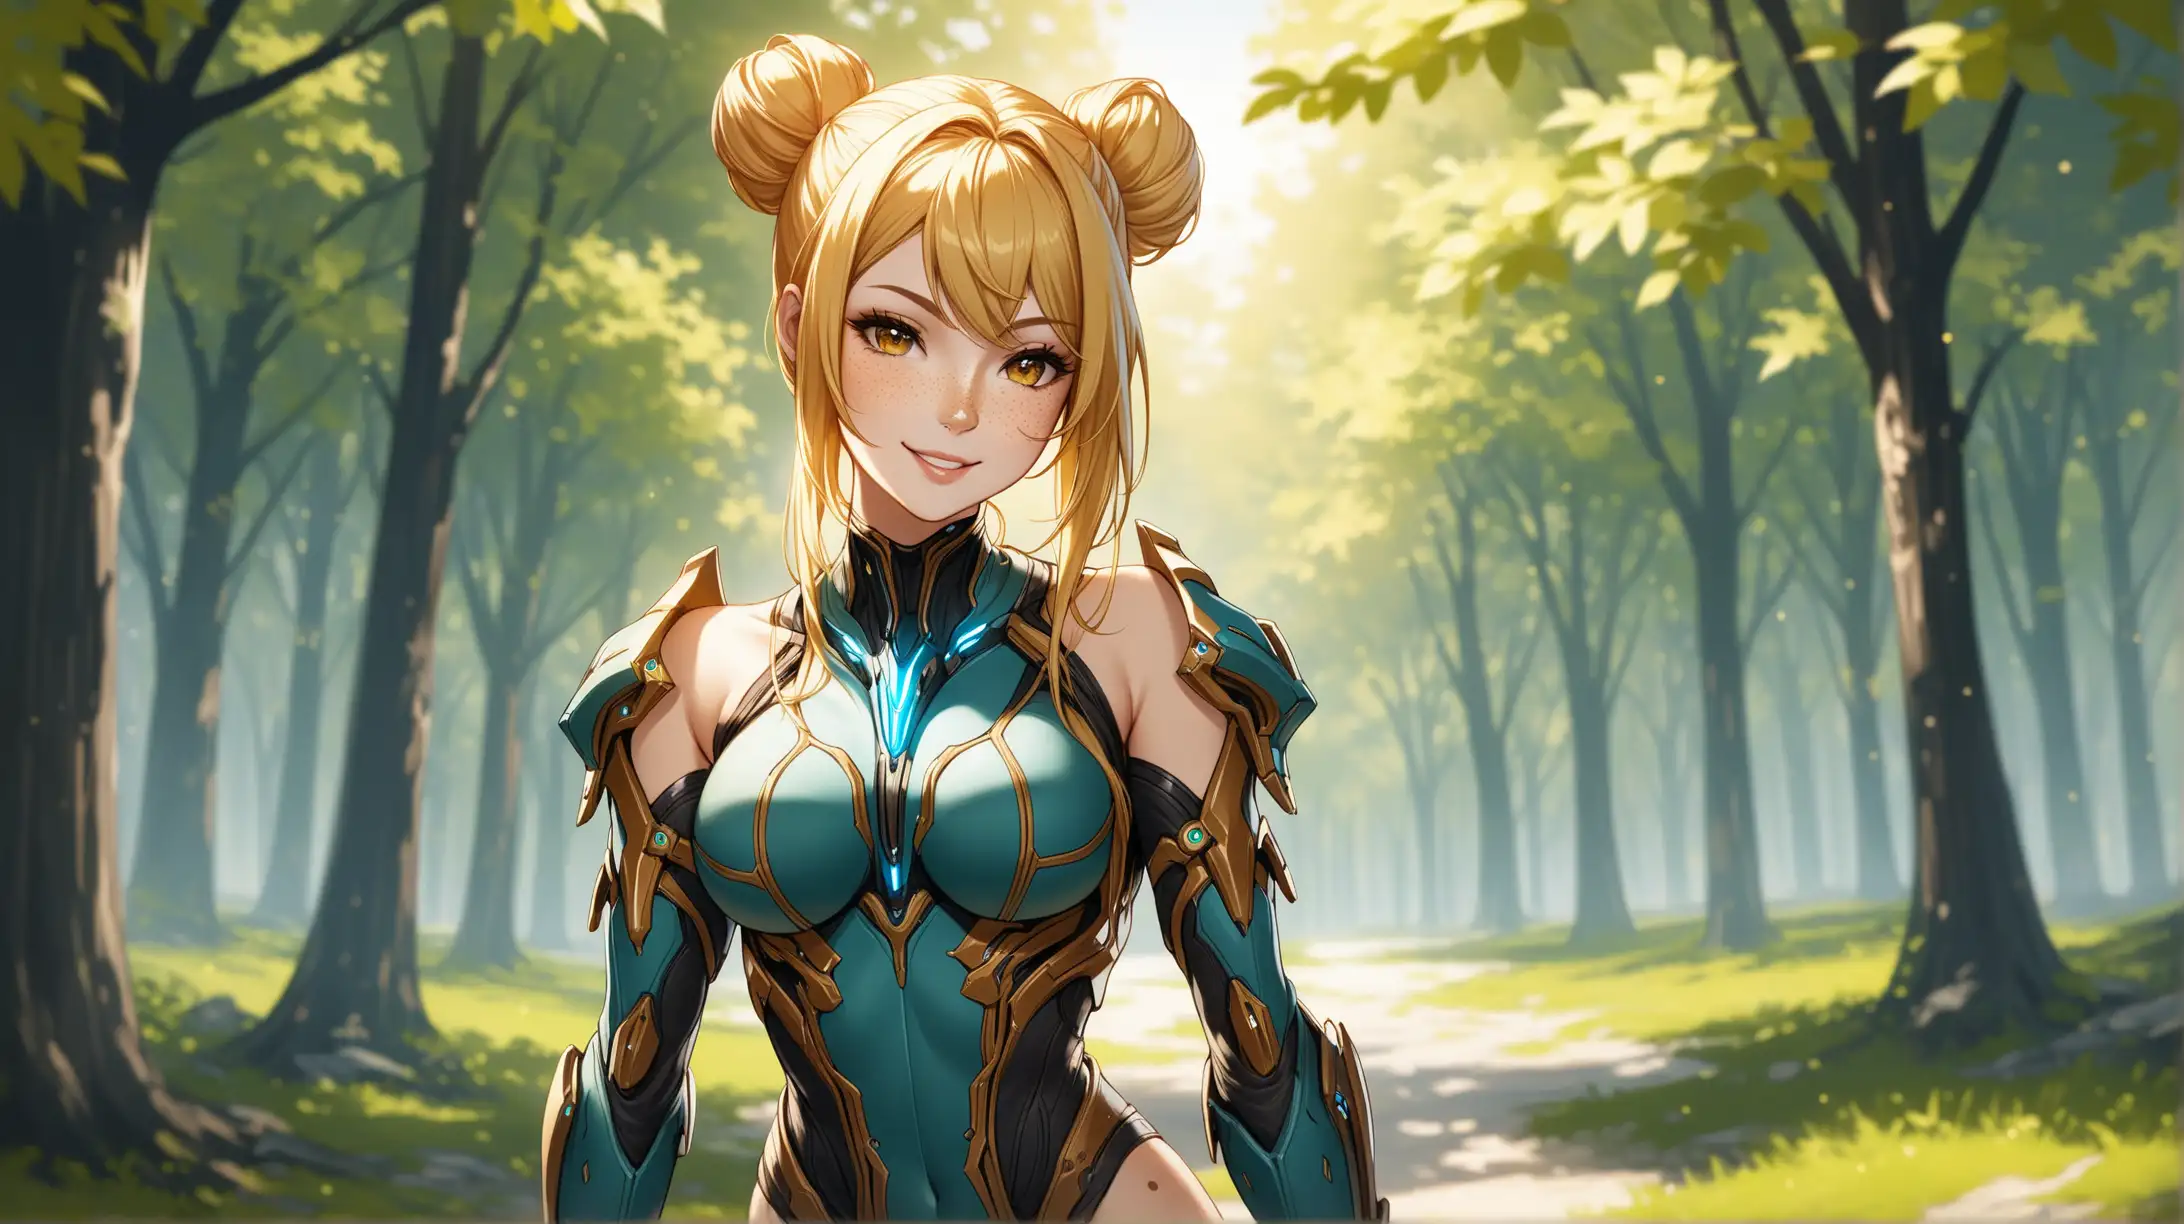 Draw a woman, long blonde hair in a bun, gold eyes, freckles, perky figure, outfit inspired from the game Warframe, high quality, long shot, outdoors, seductive, natural lighting, smiling at the viewer